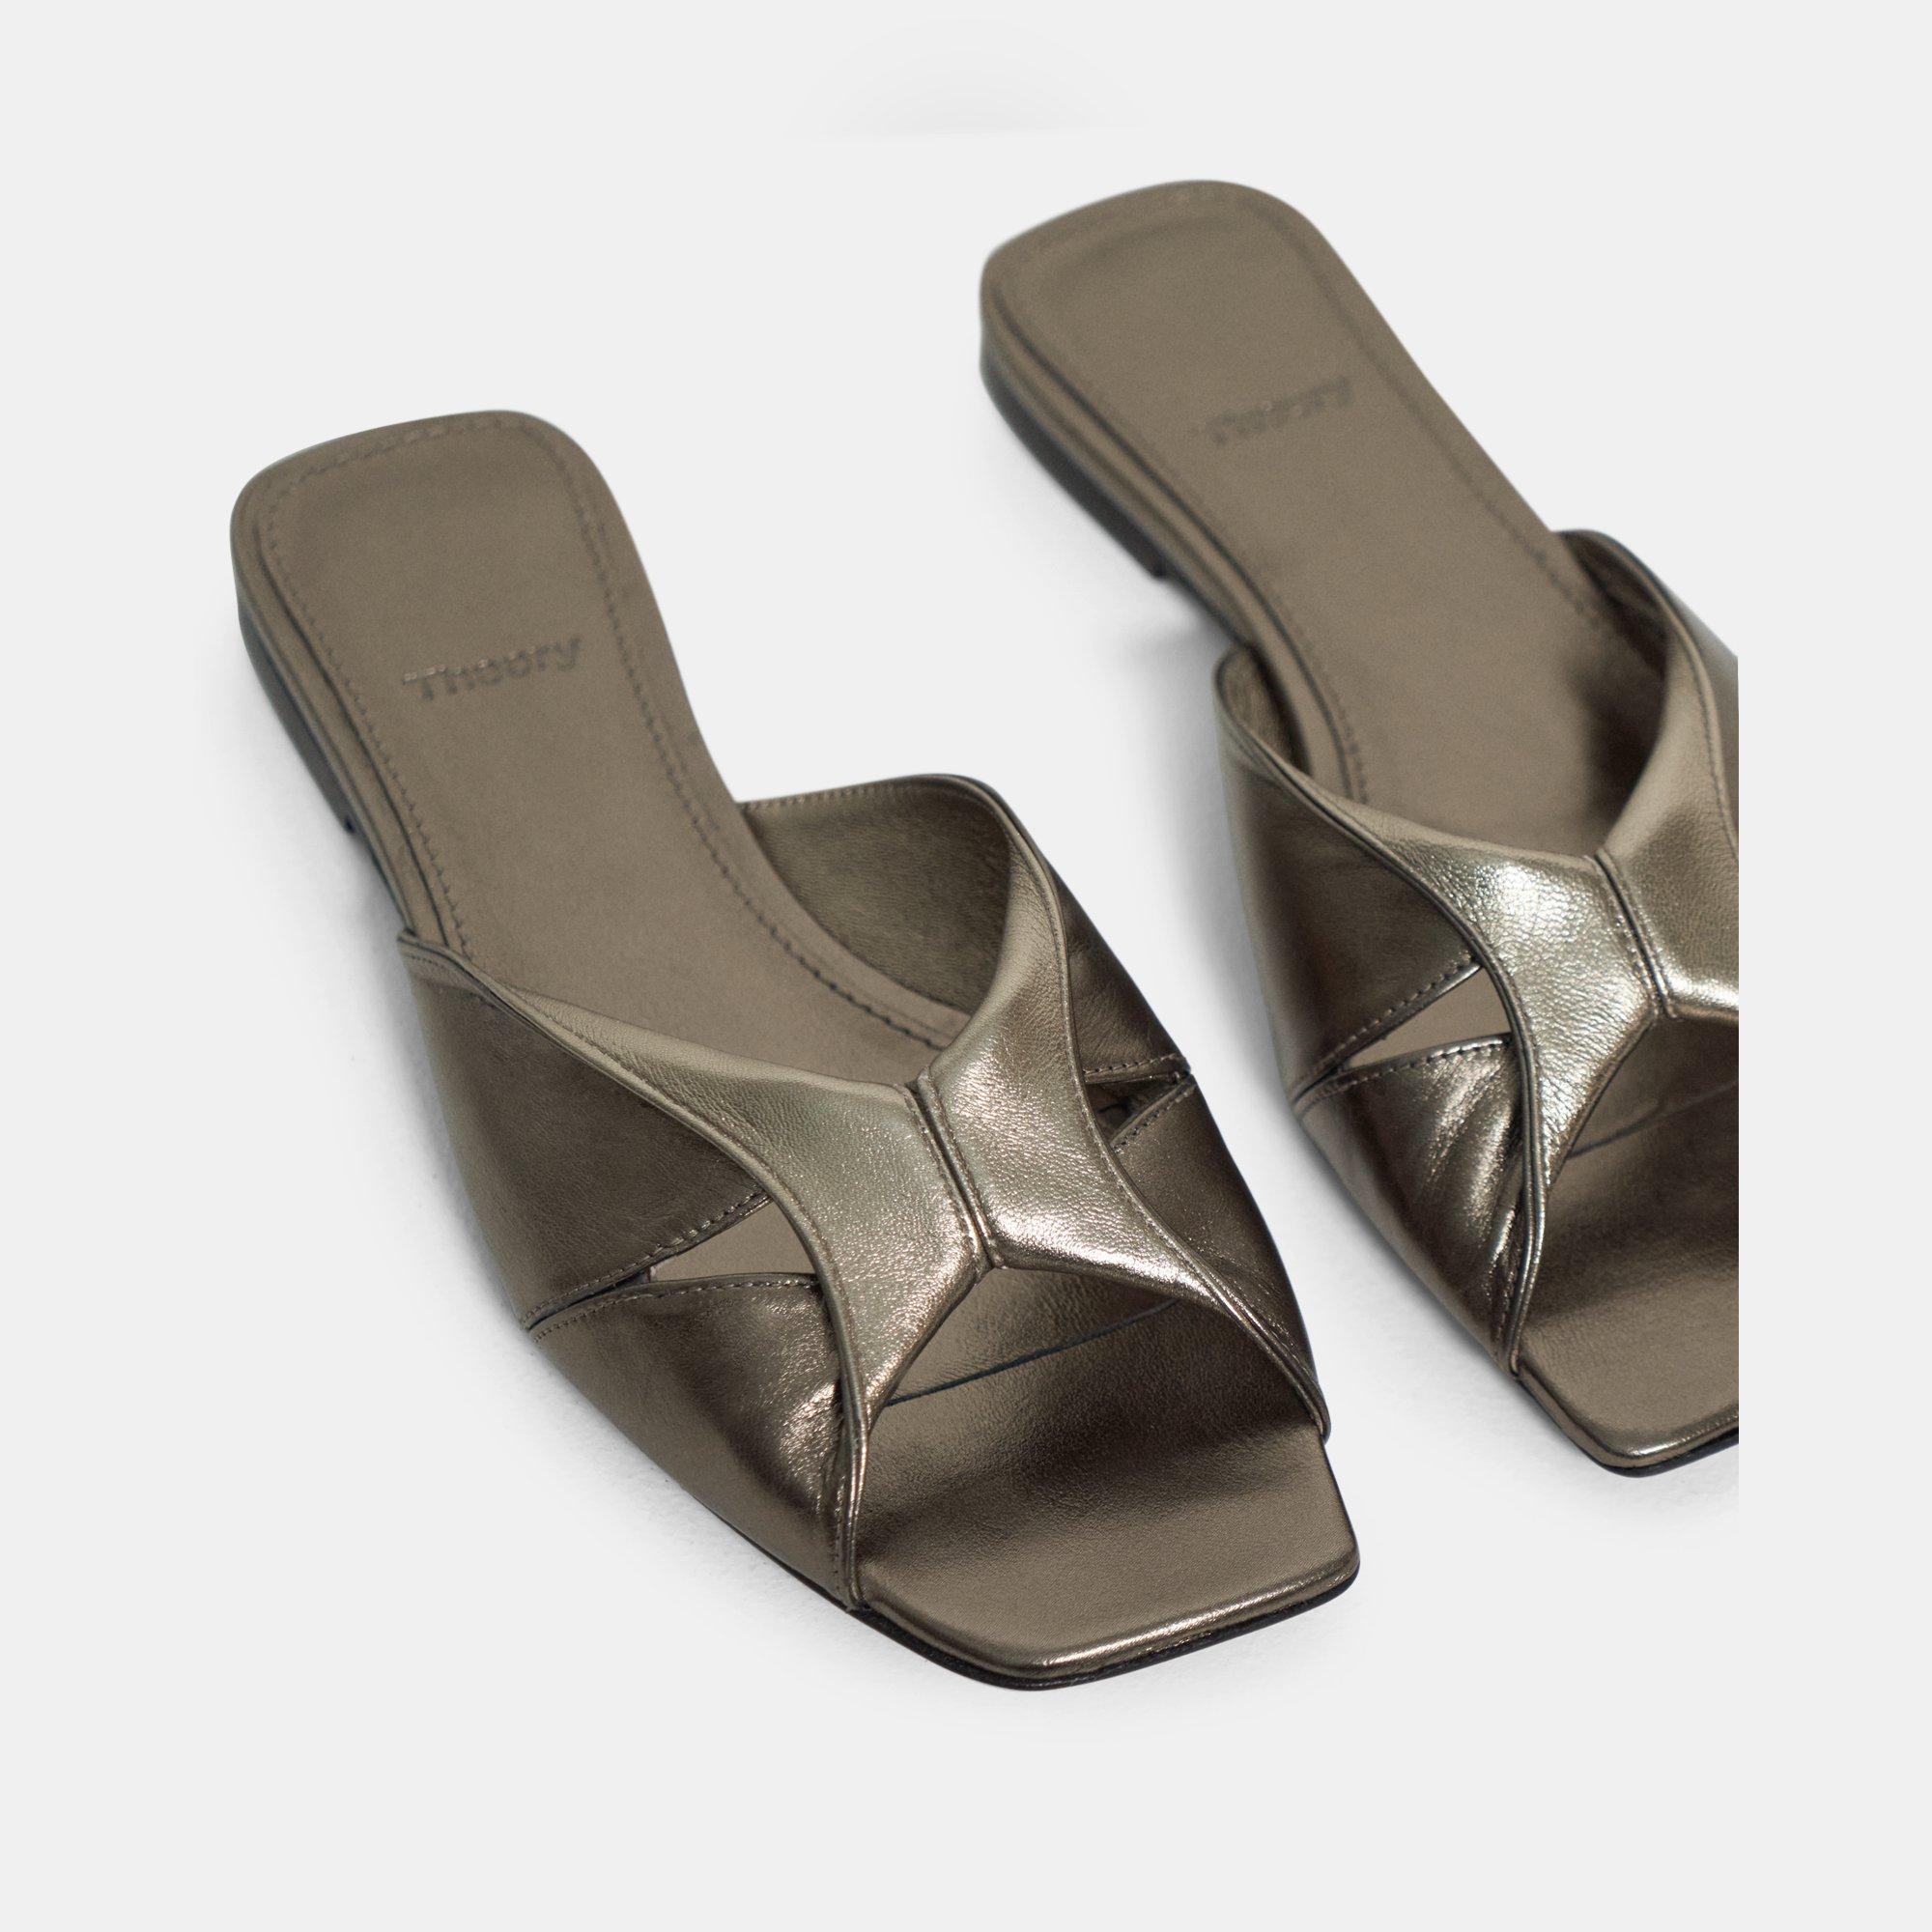 Theory Twisted Slide Sandal in Metallic Leather